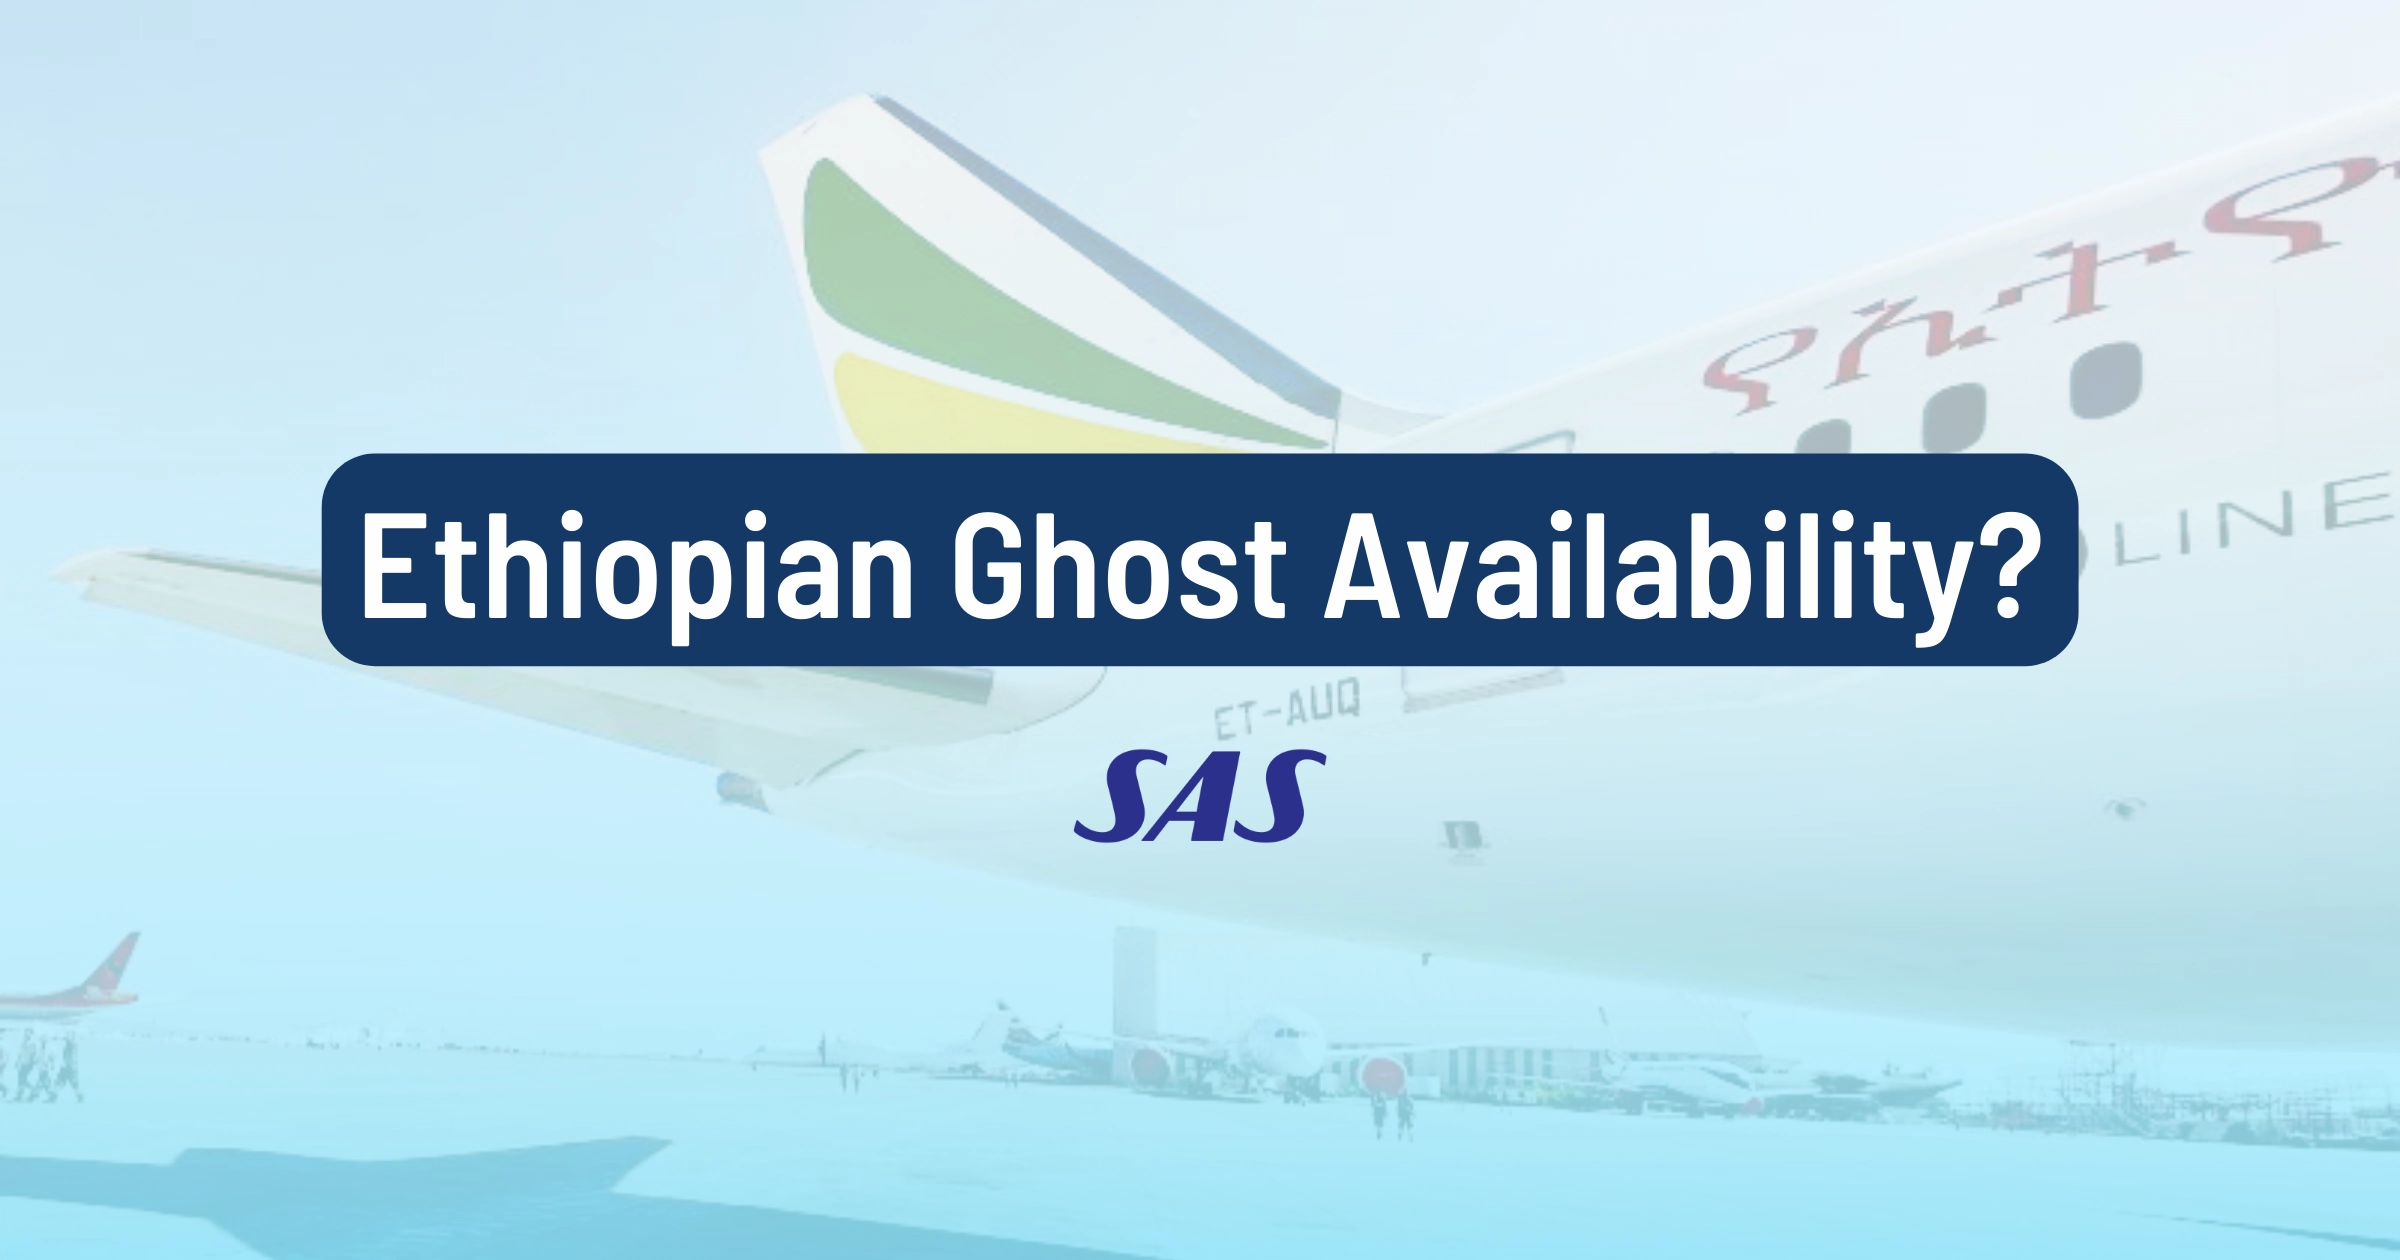 Cover image for SAS EuroBonus And Ethiopian Airlines Ghost Availability